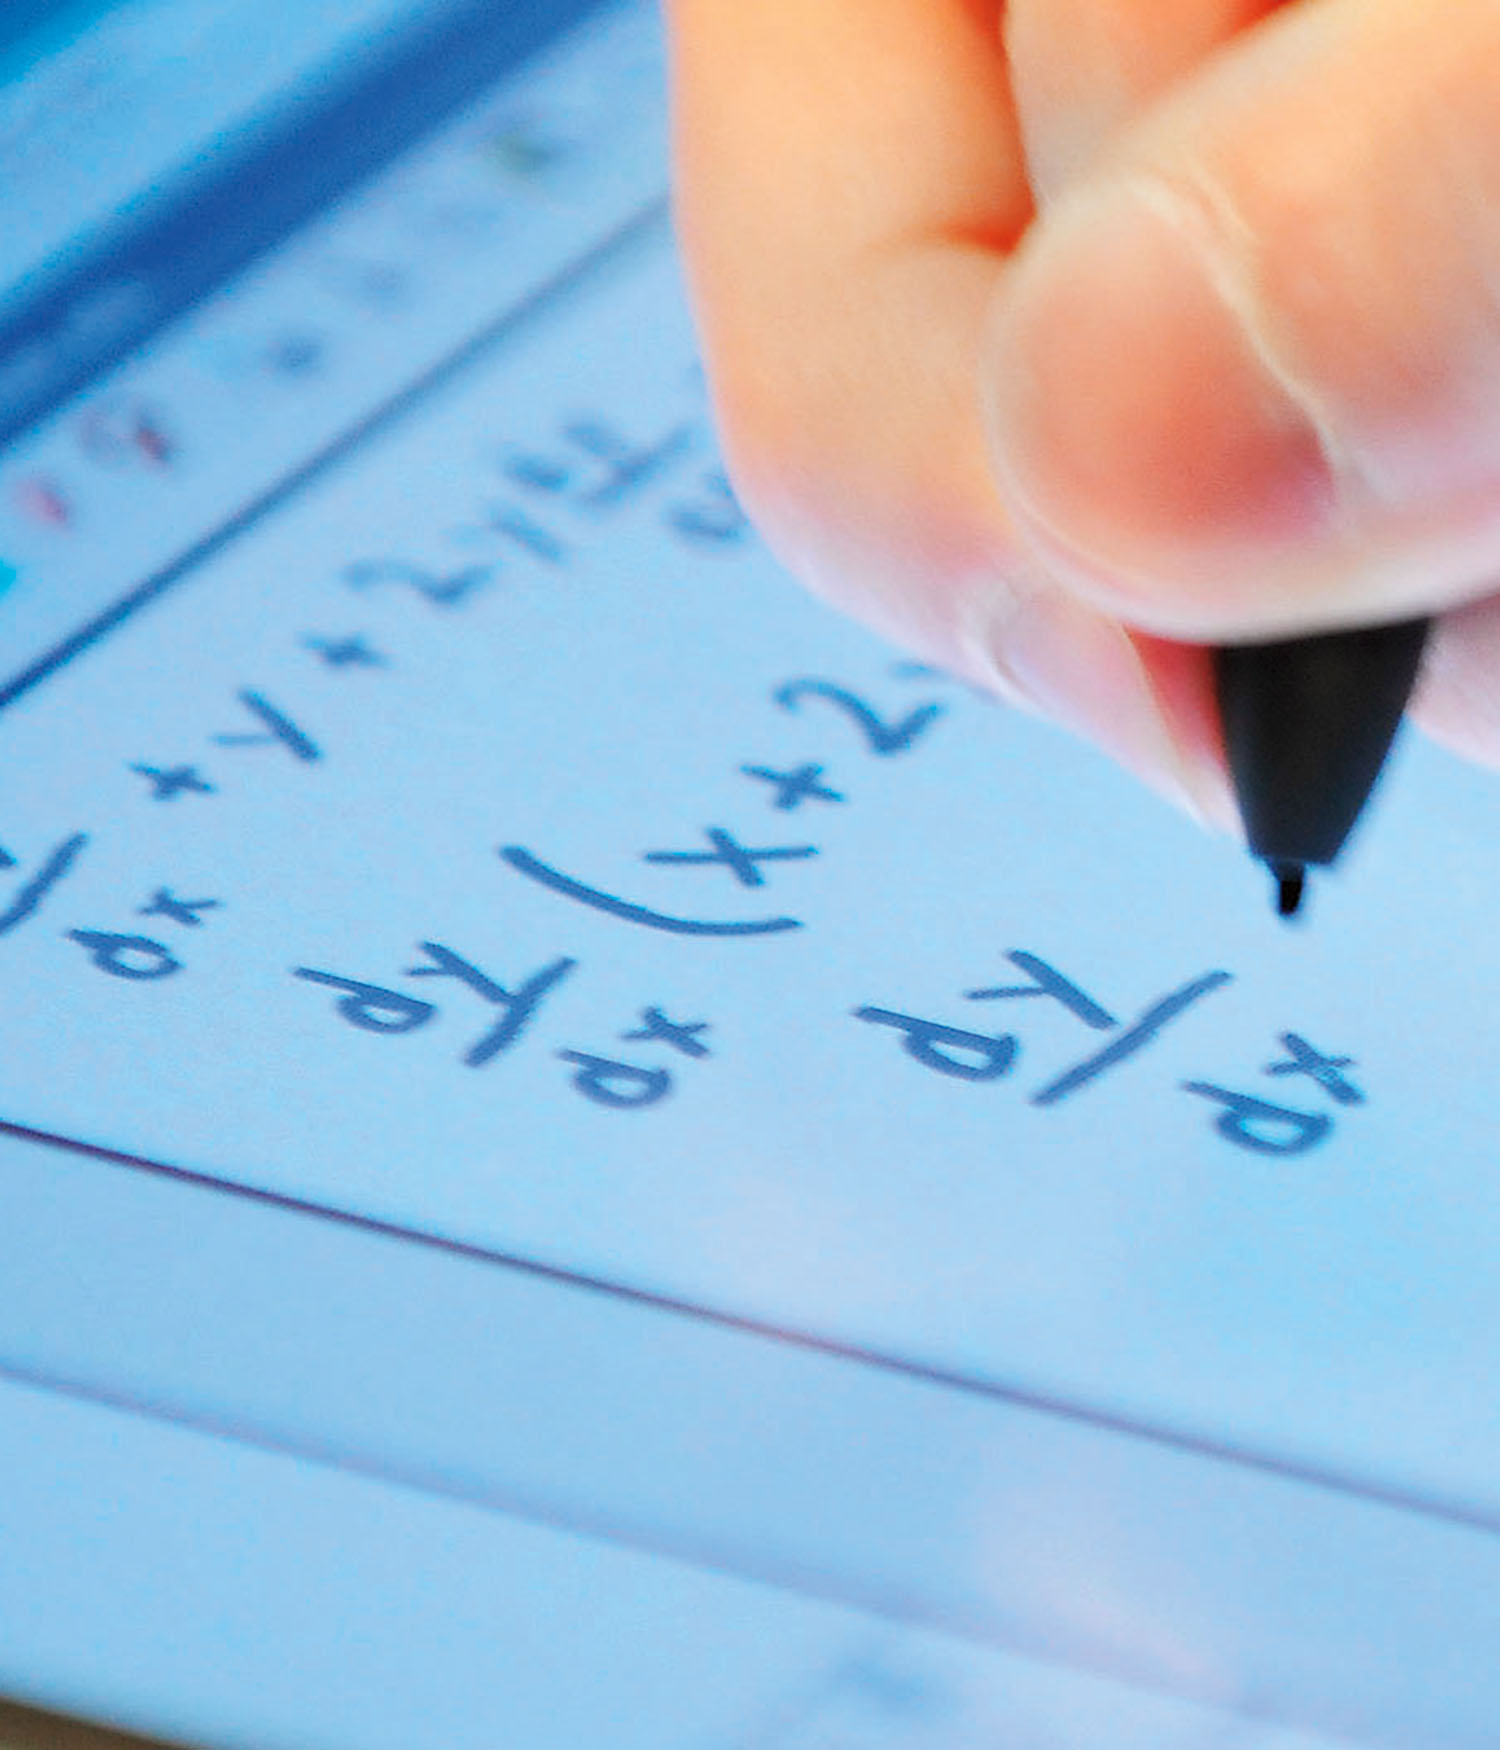 Writing formulas on a tablet